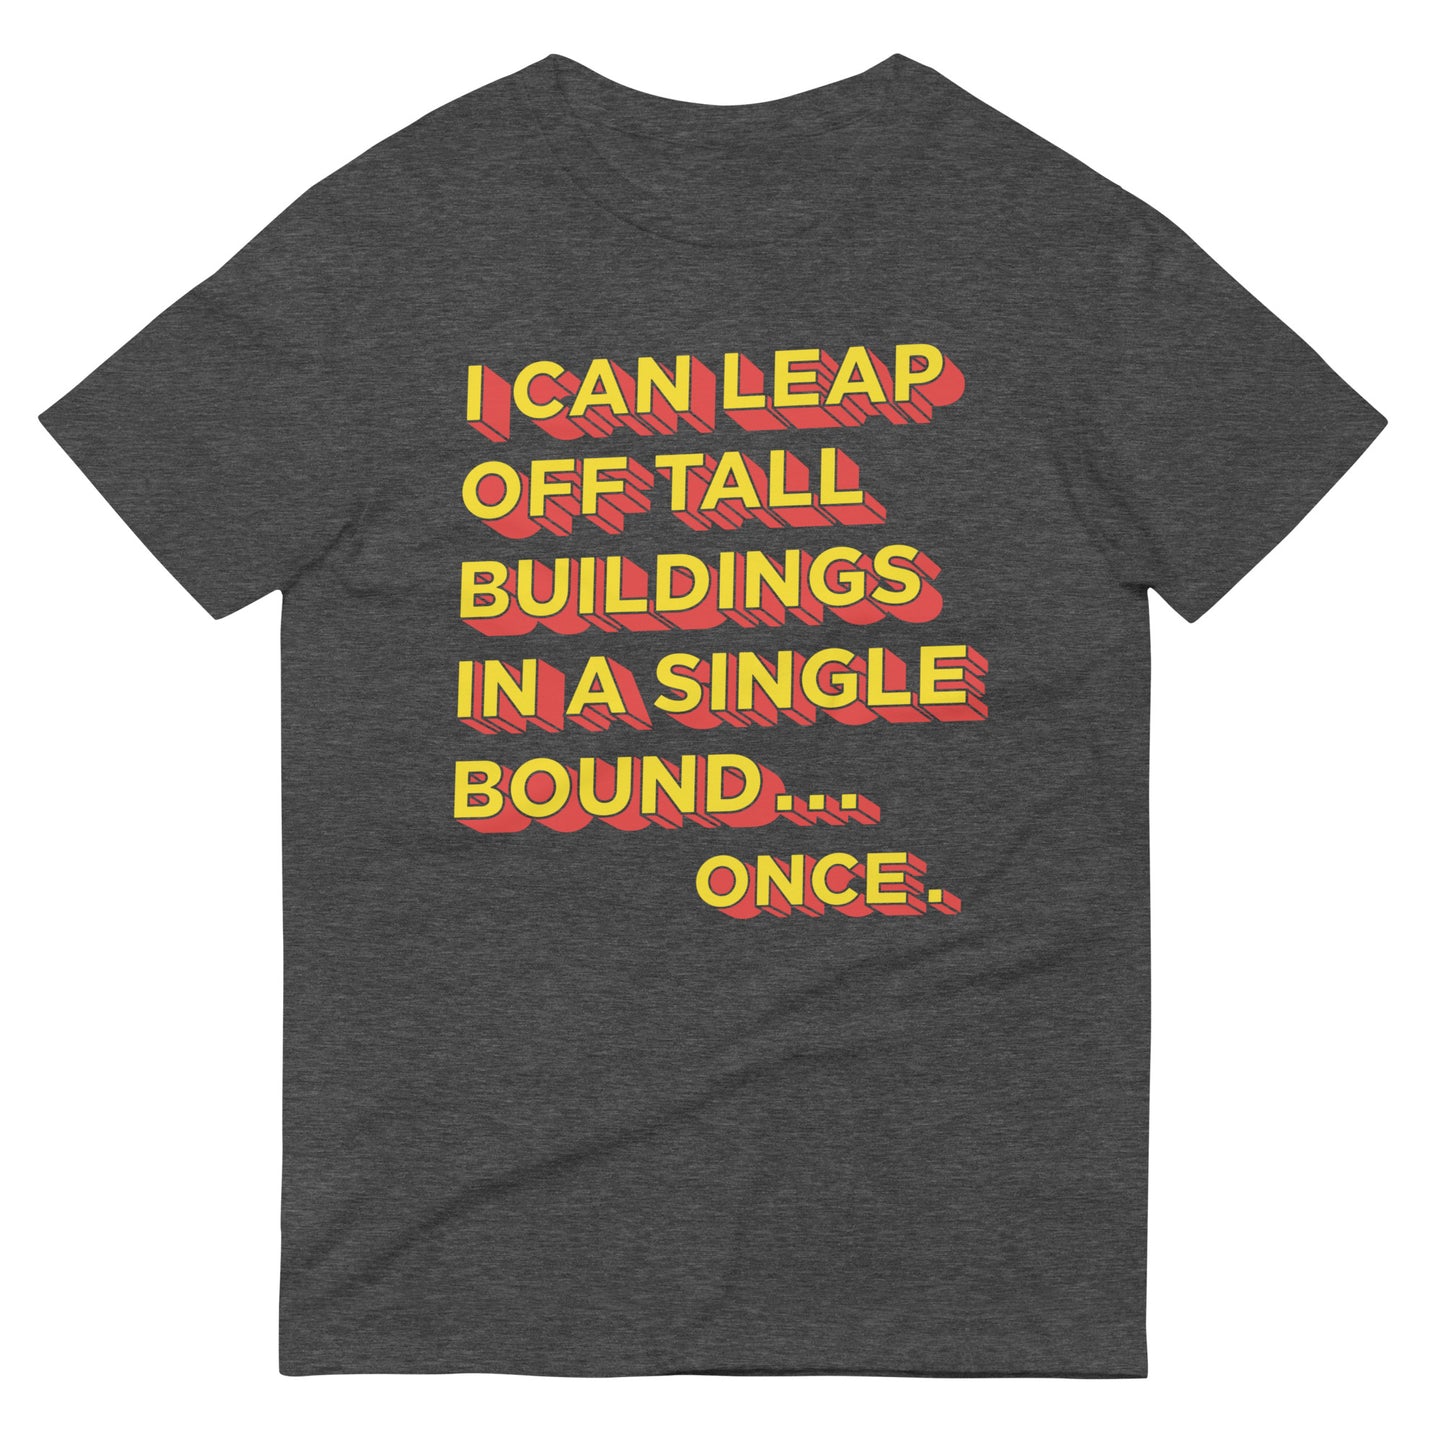 Tall Buildings In A Single Bound Men's Signature Tee